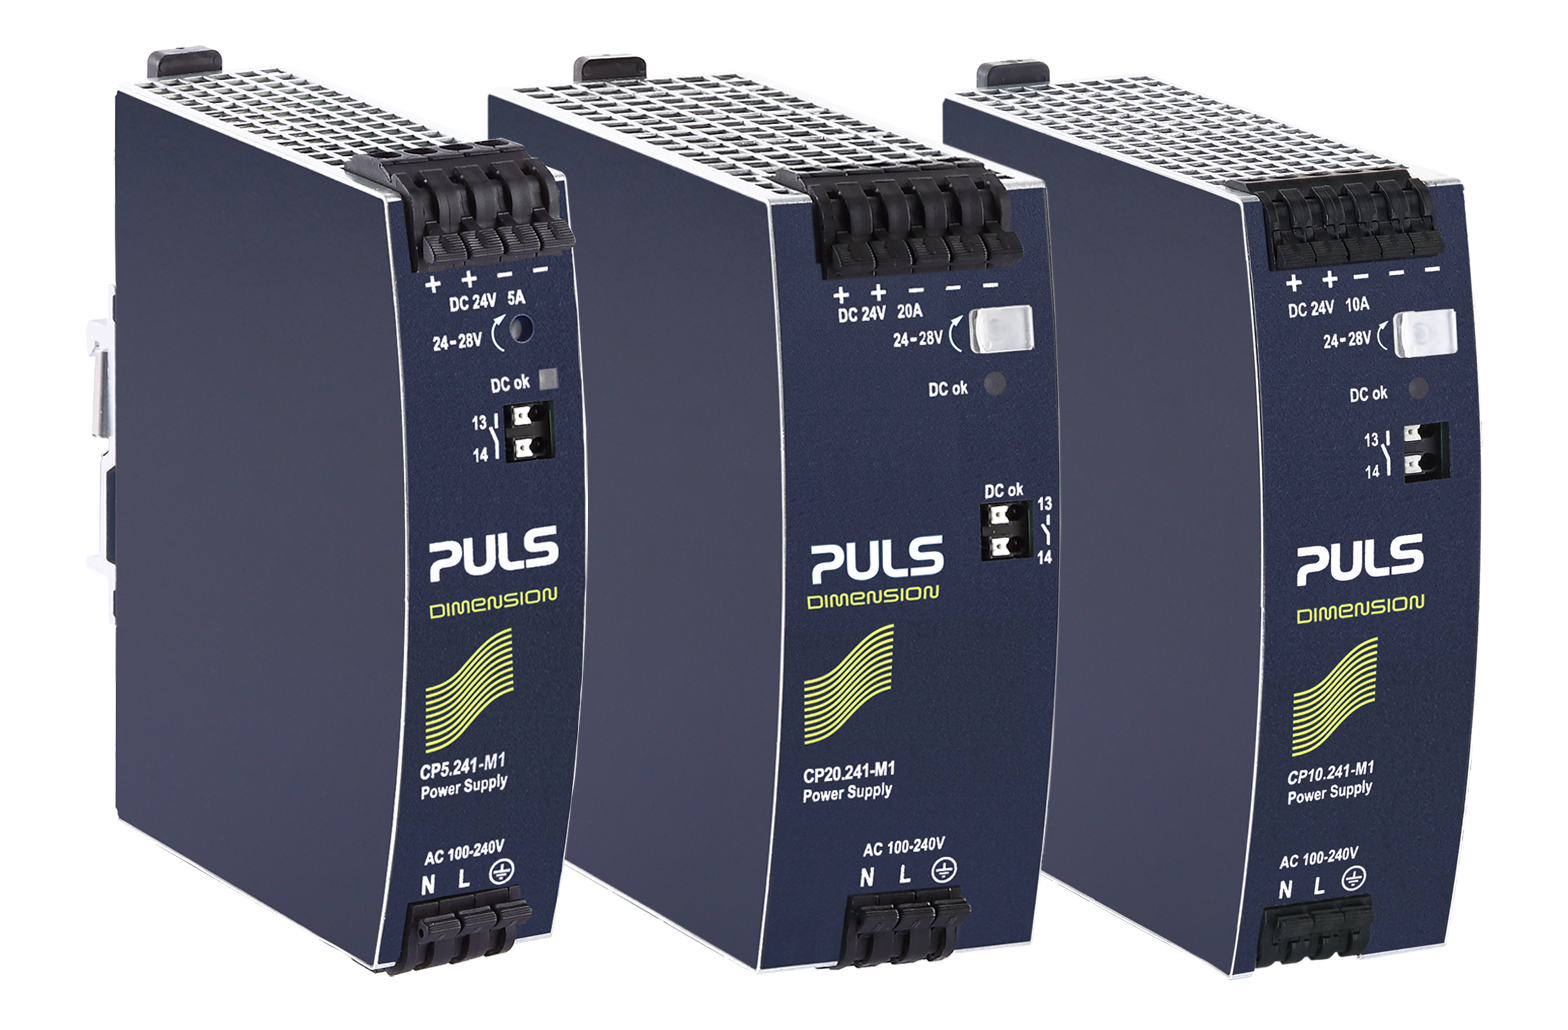 Medical power supplies from PULS